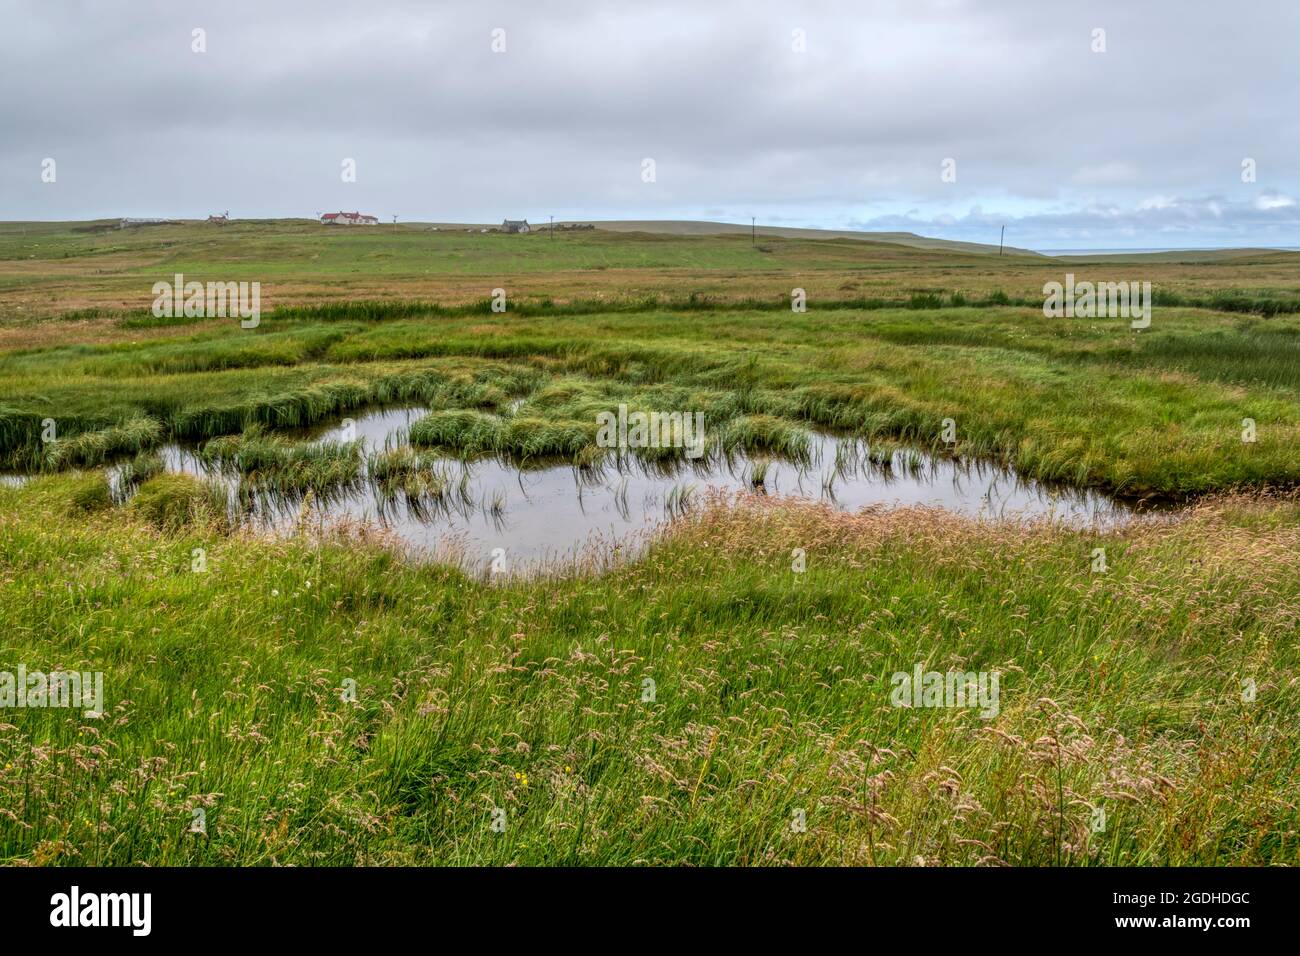 The view from the hide at RSPB Fetlar bird reserve on the island of Fetlar, Shetland. Stock Photo